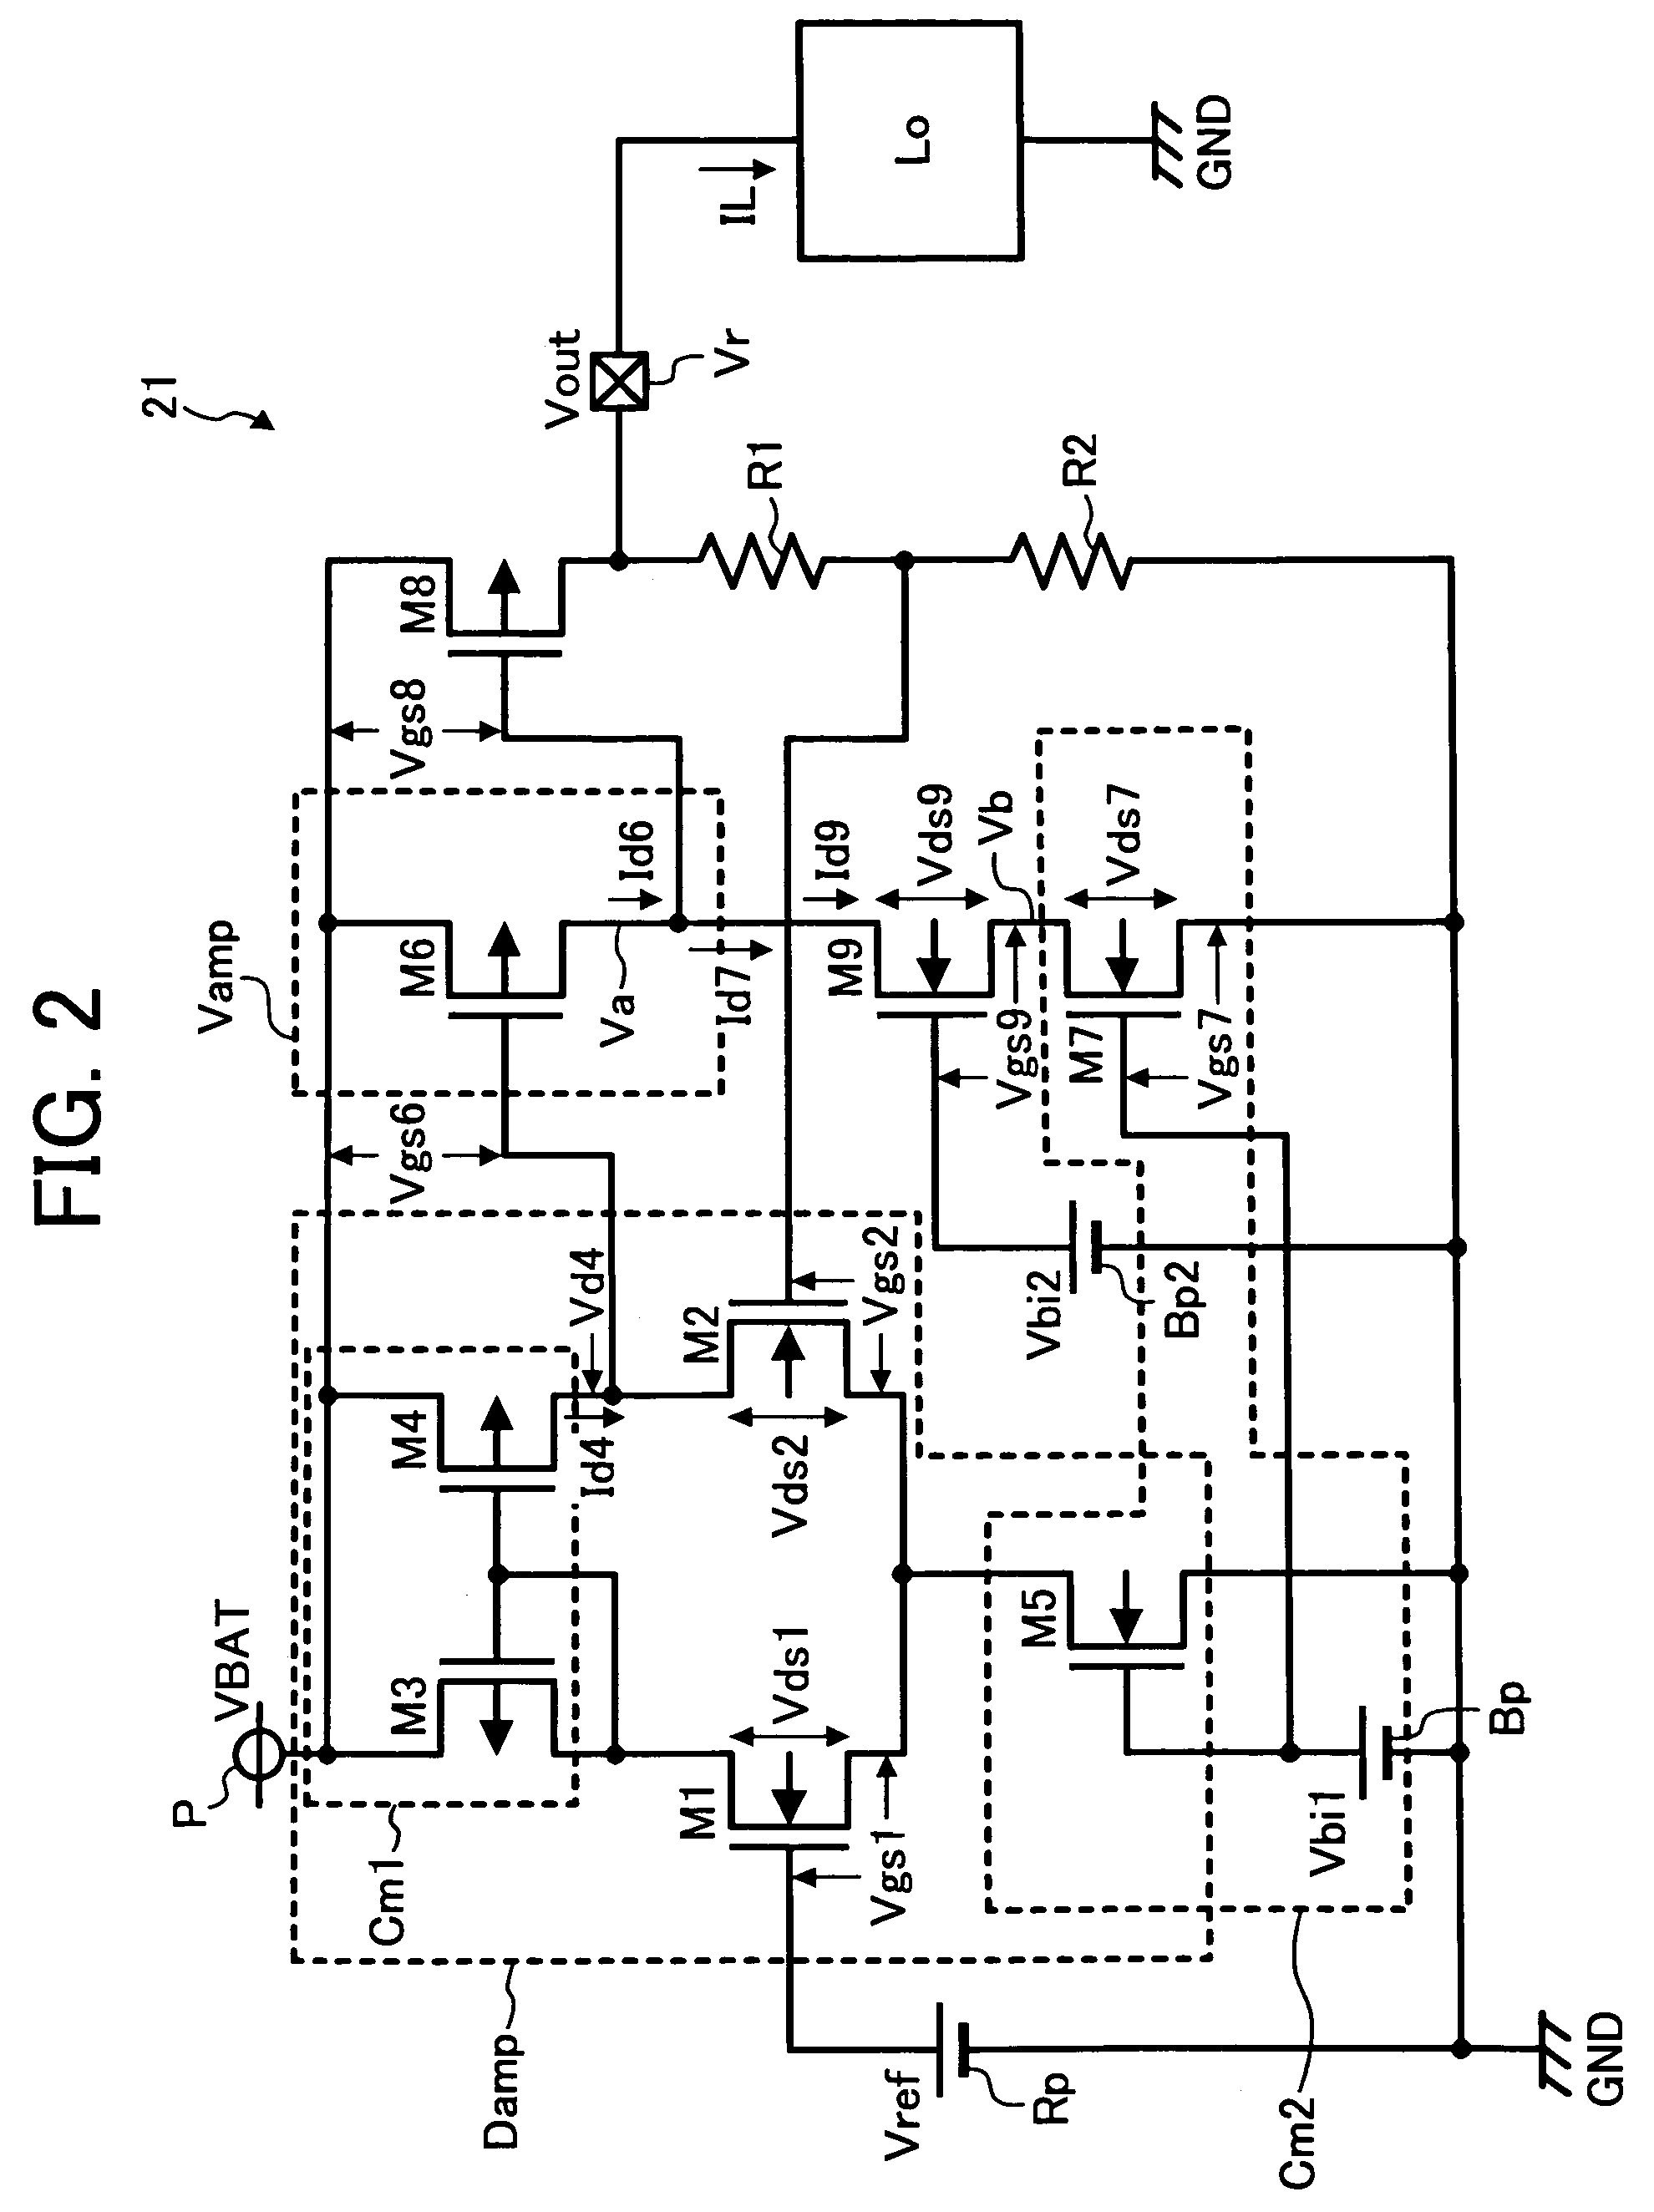 Method and apparatus for outputting constant voltage